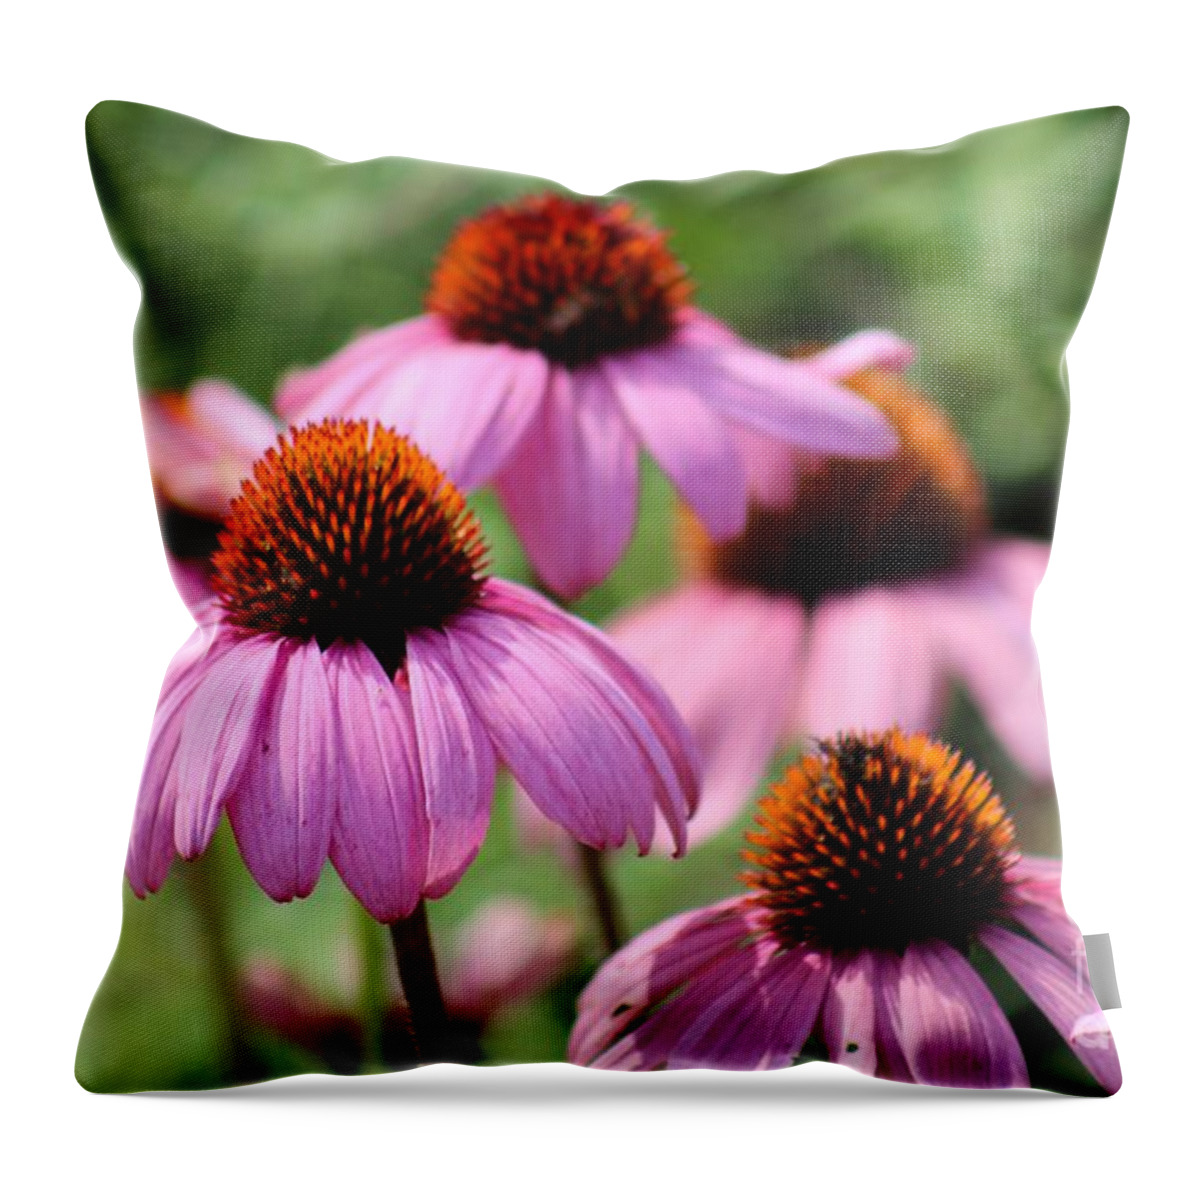 Pink Throw Pillow featuring the photograph Nature's Beauty 96 by Deena Withycombe